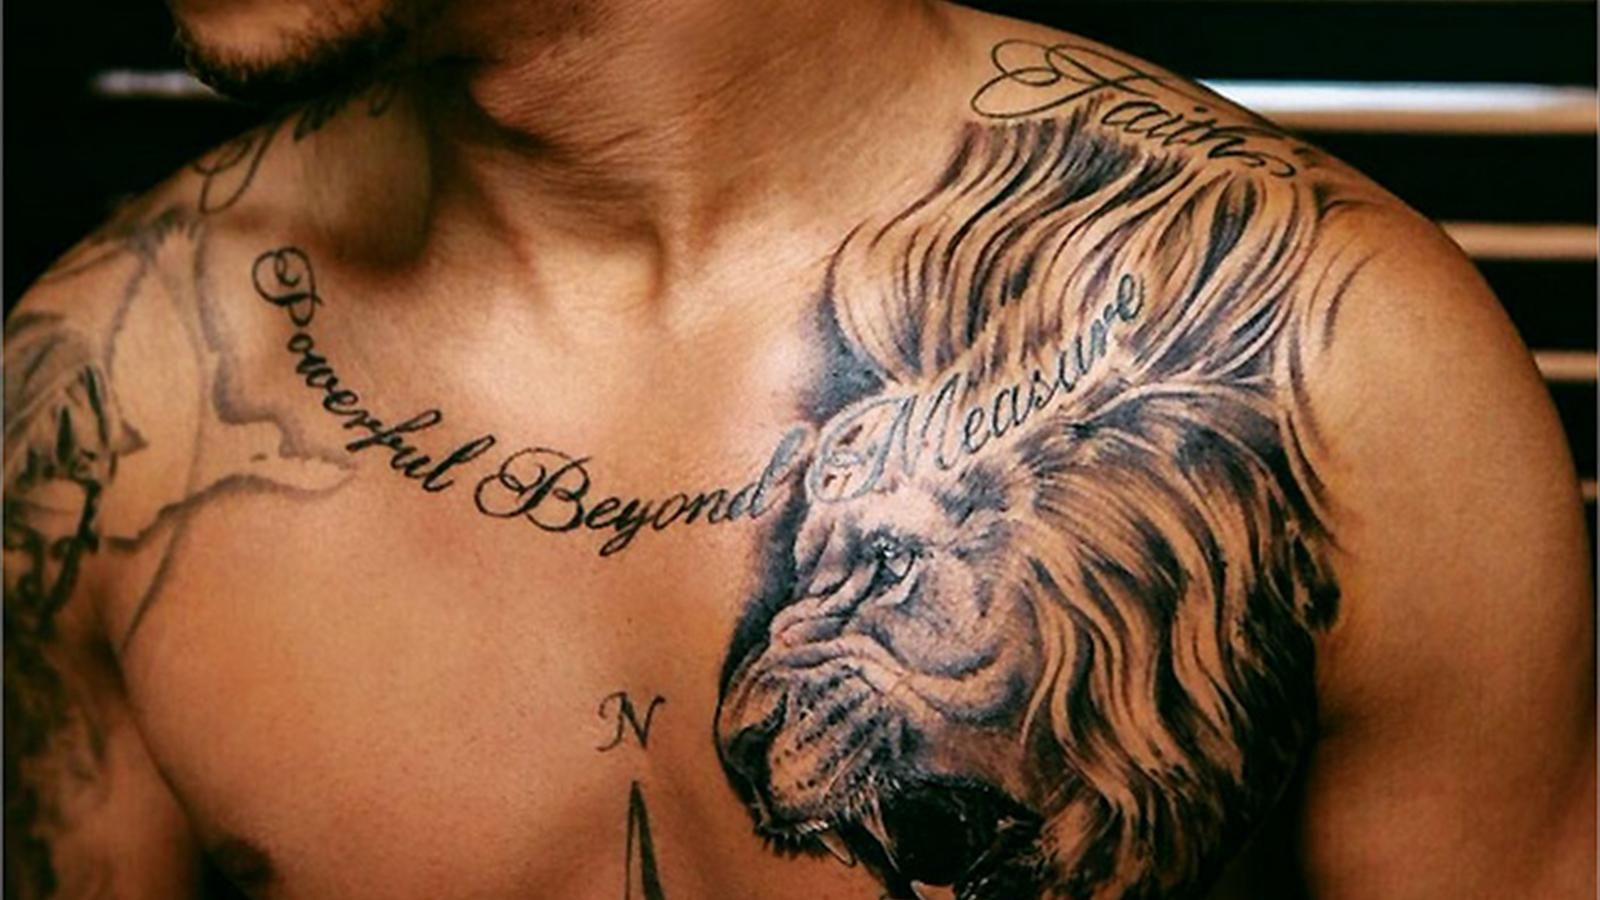 Powerful Beyond Measure – Realistic Roaring Lion Tattoo on Chest For Men